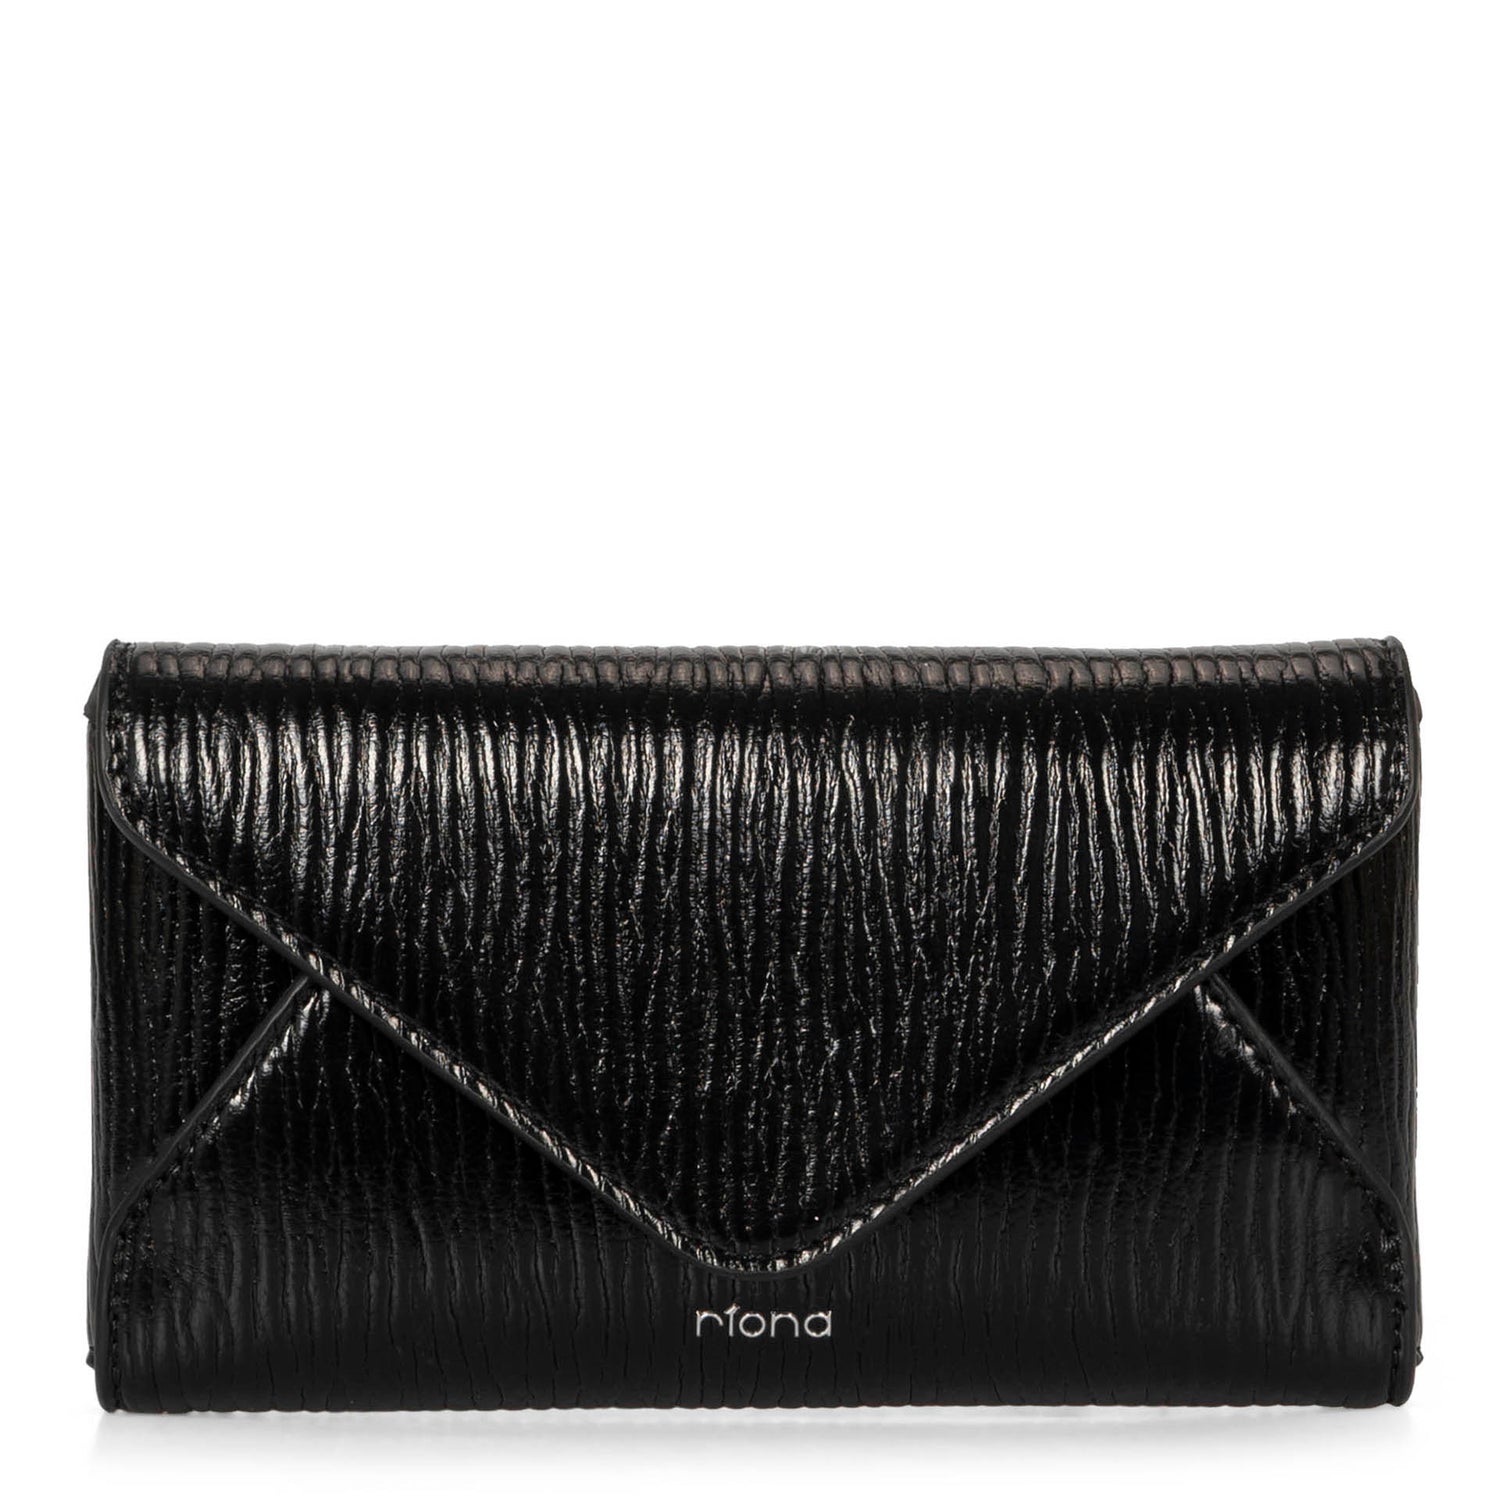 Front view of black glossy vegan crossbody bag called Evening in an envelopy style designed by Riona, showcasing its enevelopye closure and shiney textured PU look.